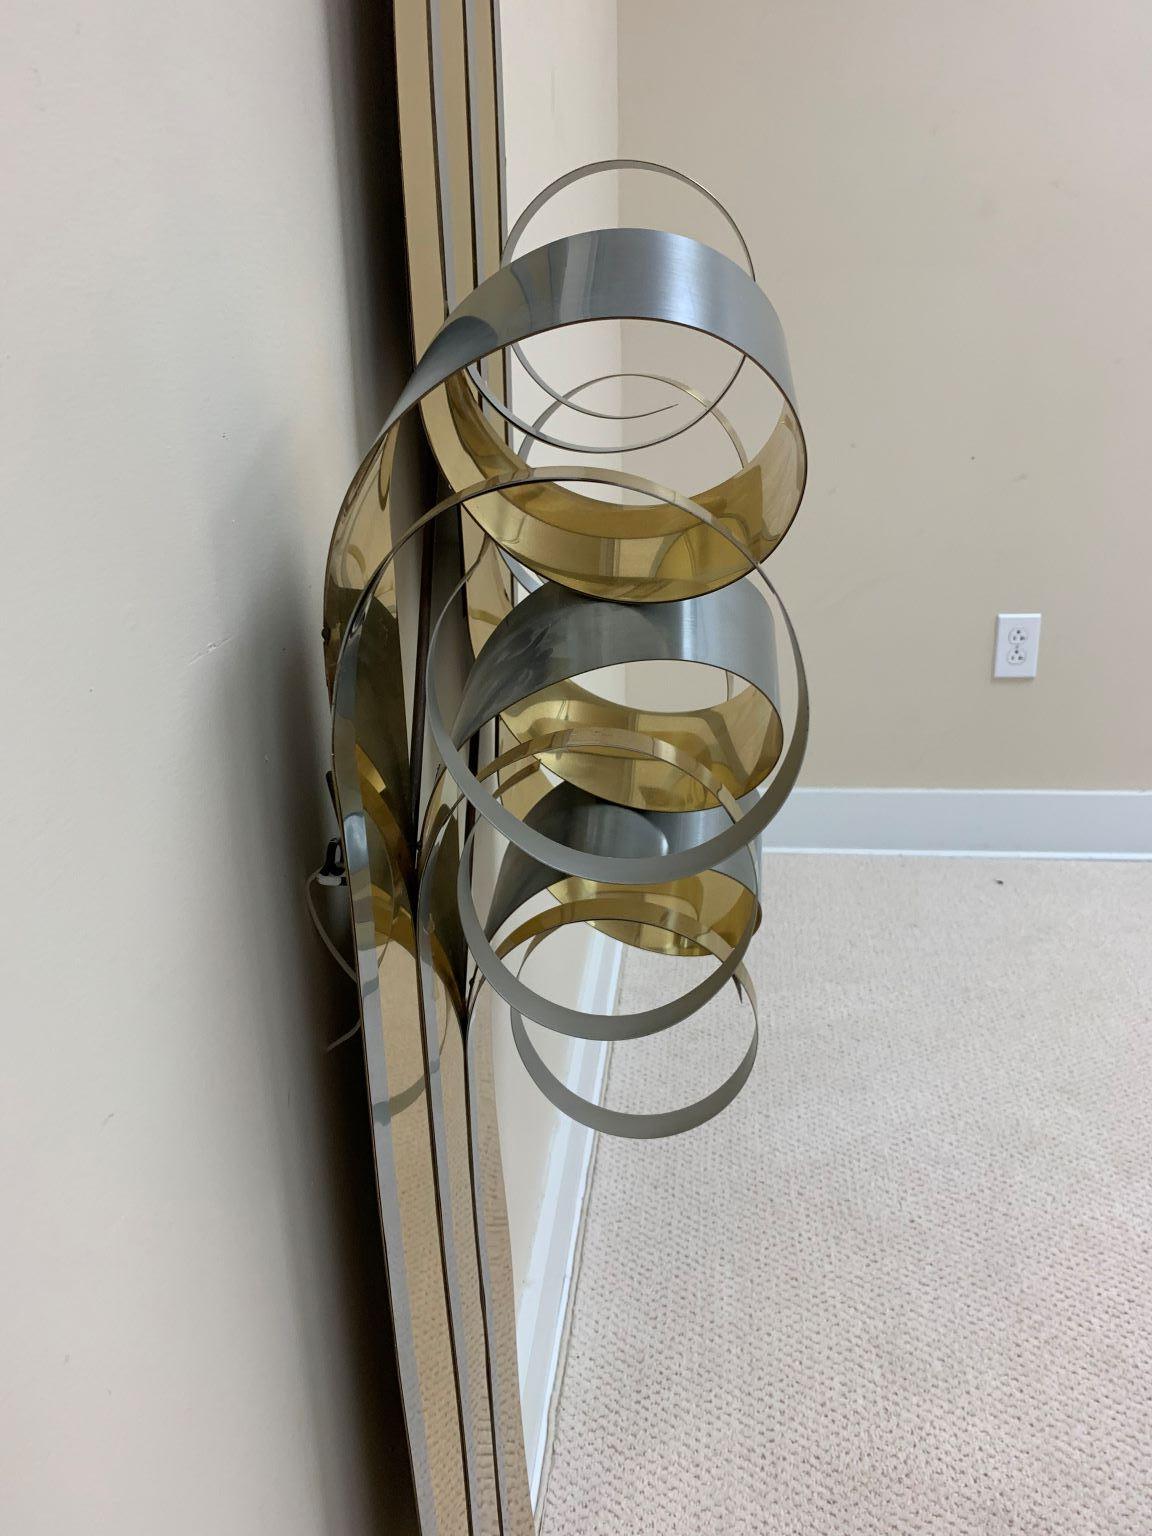 C. Jere Large Ribbon Brass and Steel Art Wall Sculpture C.1989 In Good Condition For Sale In Bernville, PA